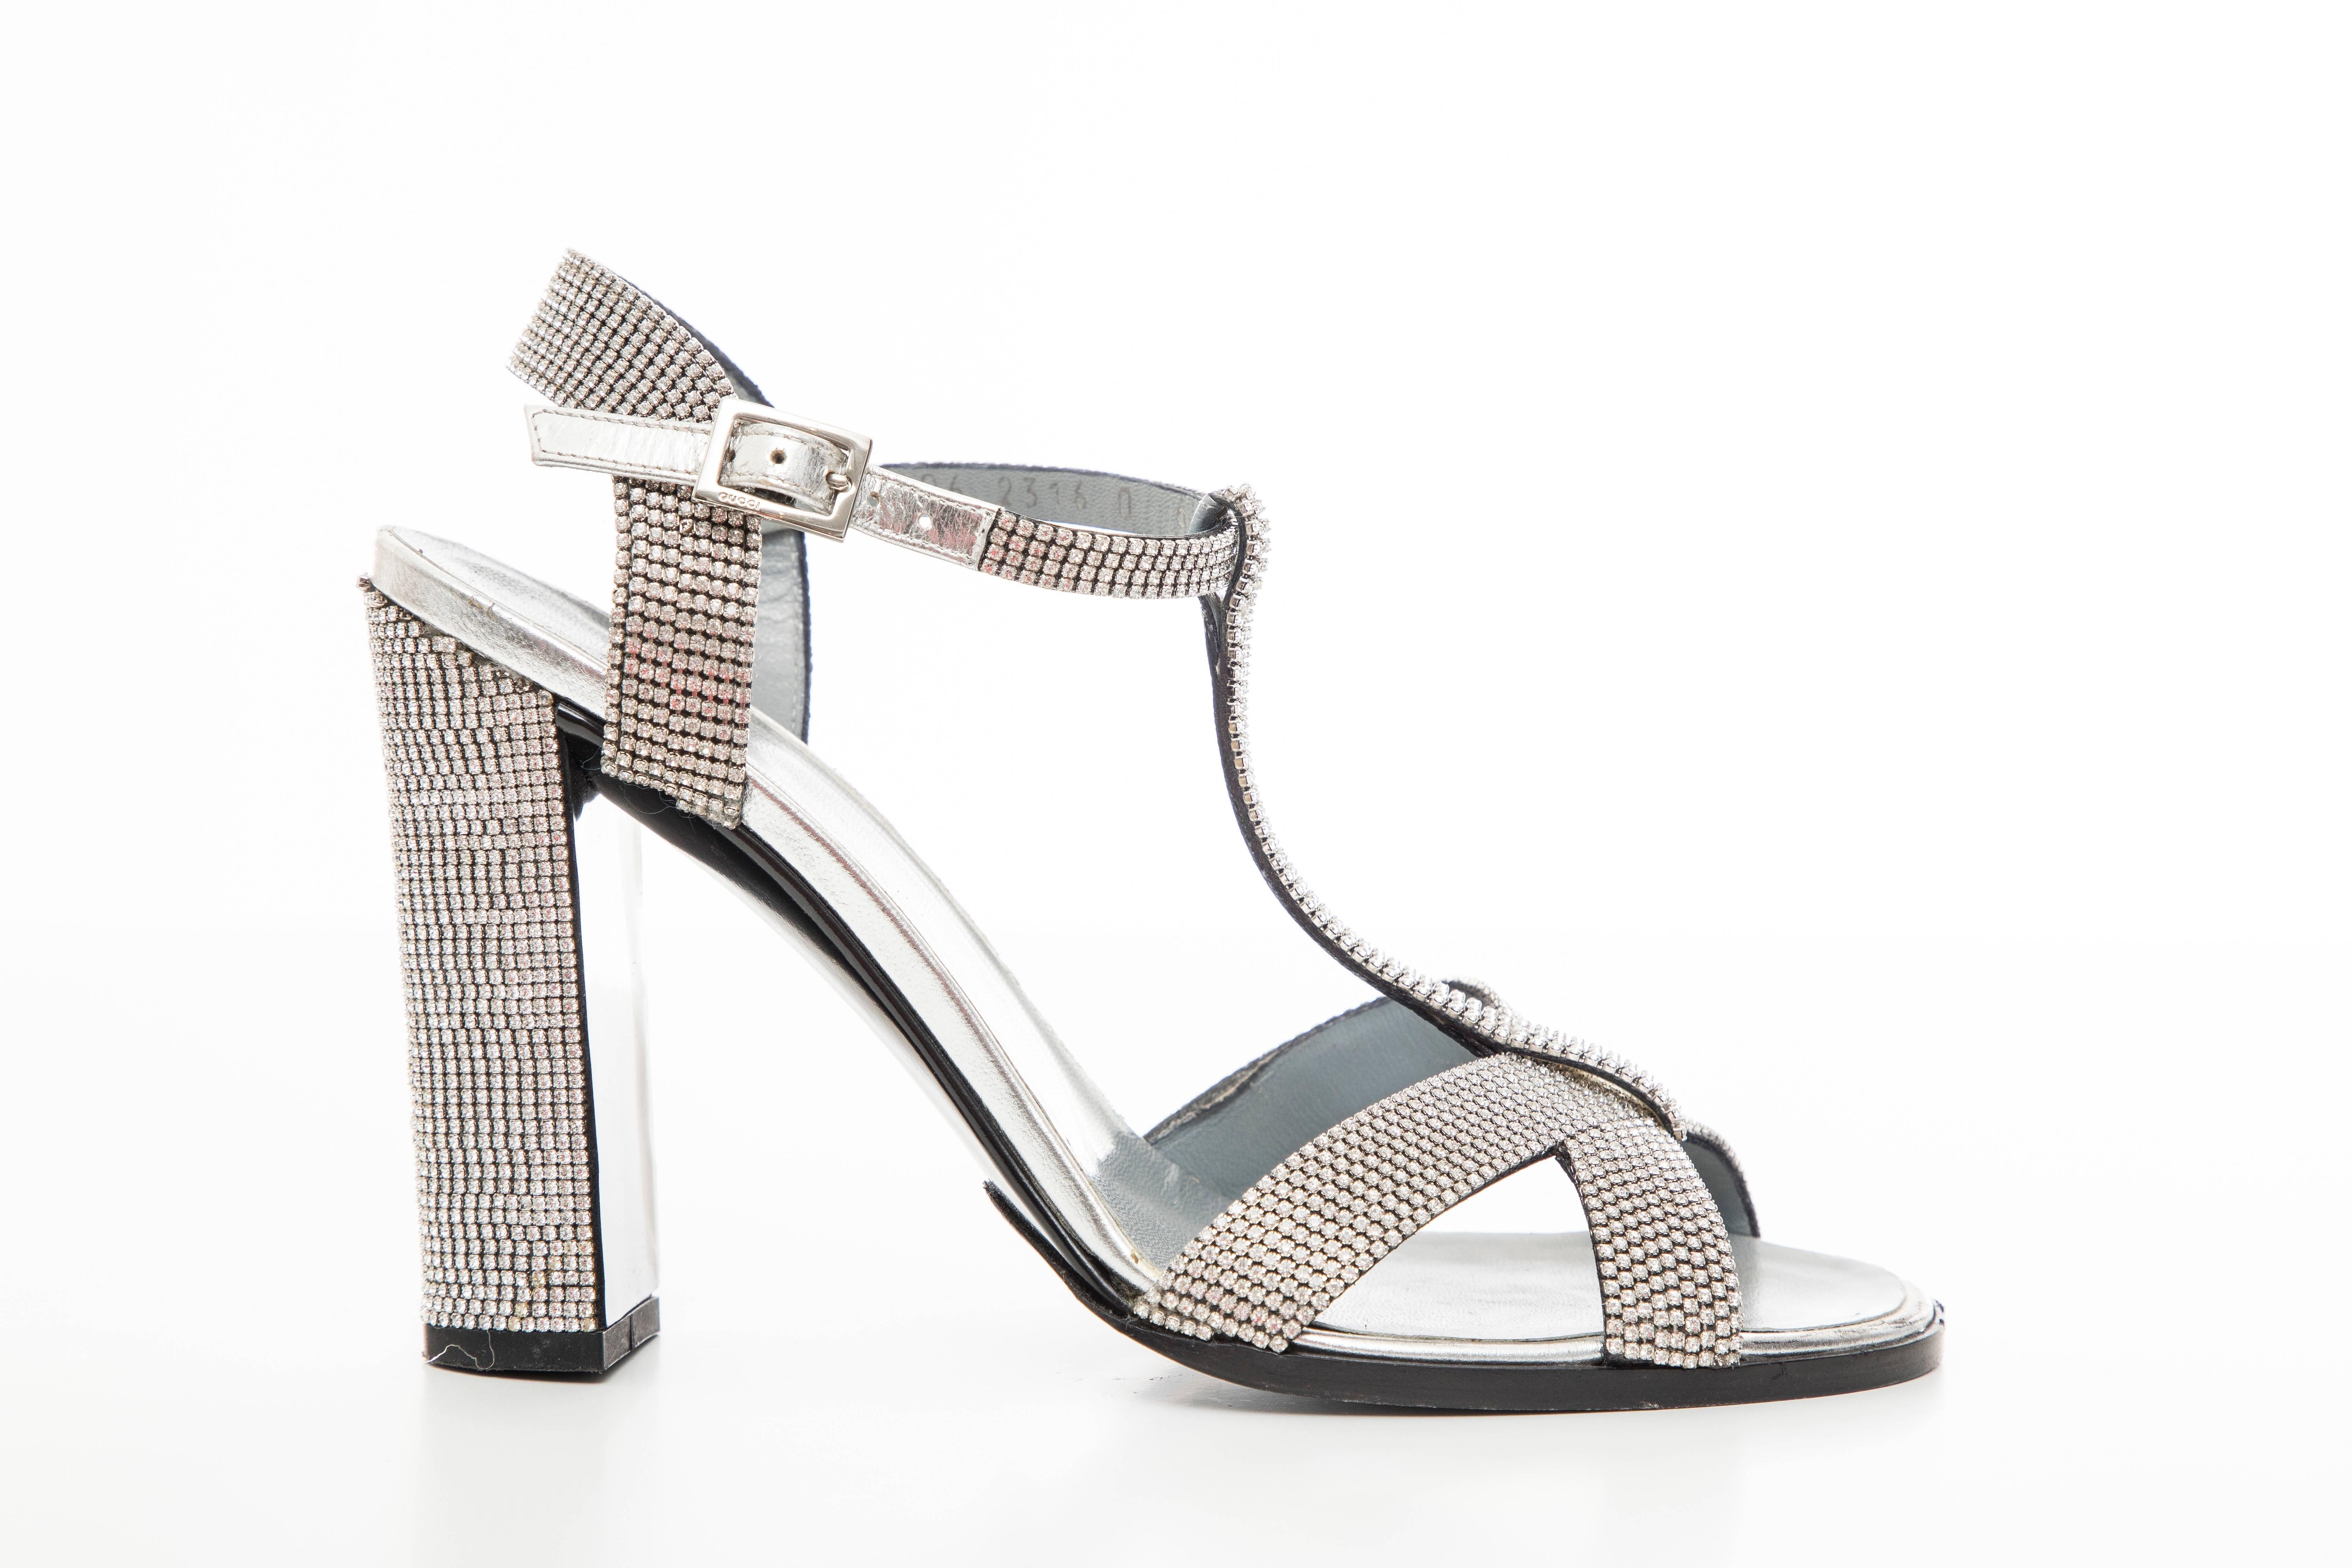 Tom Ford for Gucci, Spring-Summer 2000 metallic silver leather T-strap sandals with strass crystal embellishments throughout, covered heels and buckle closure at ankle straps. 

Heels: 4.25